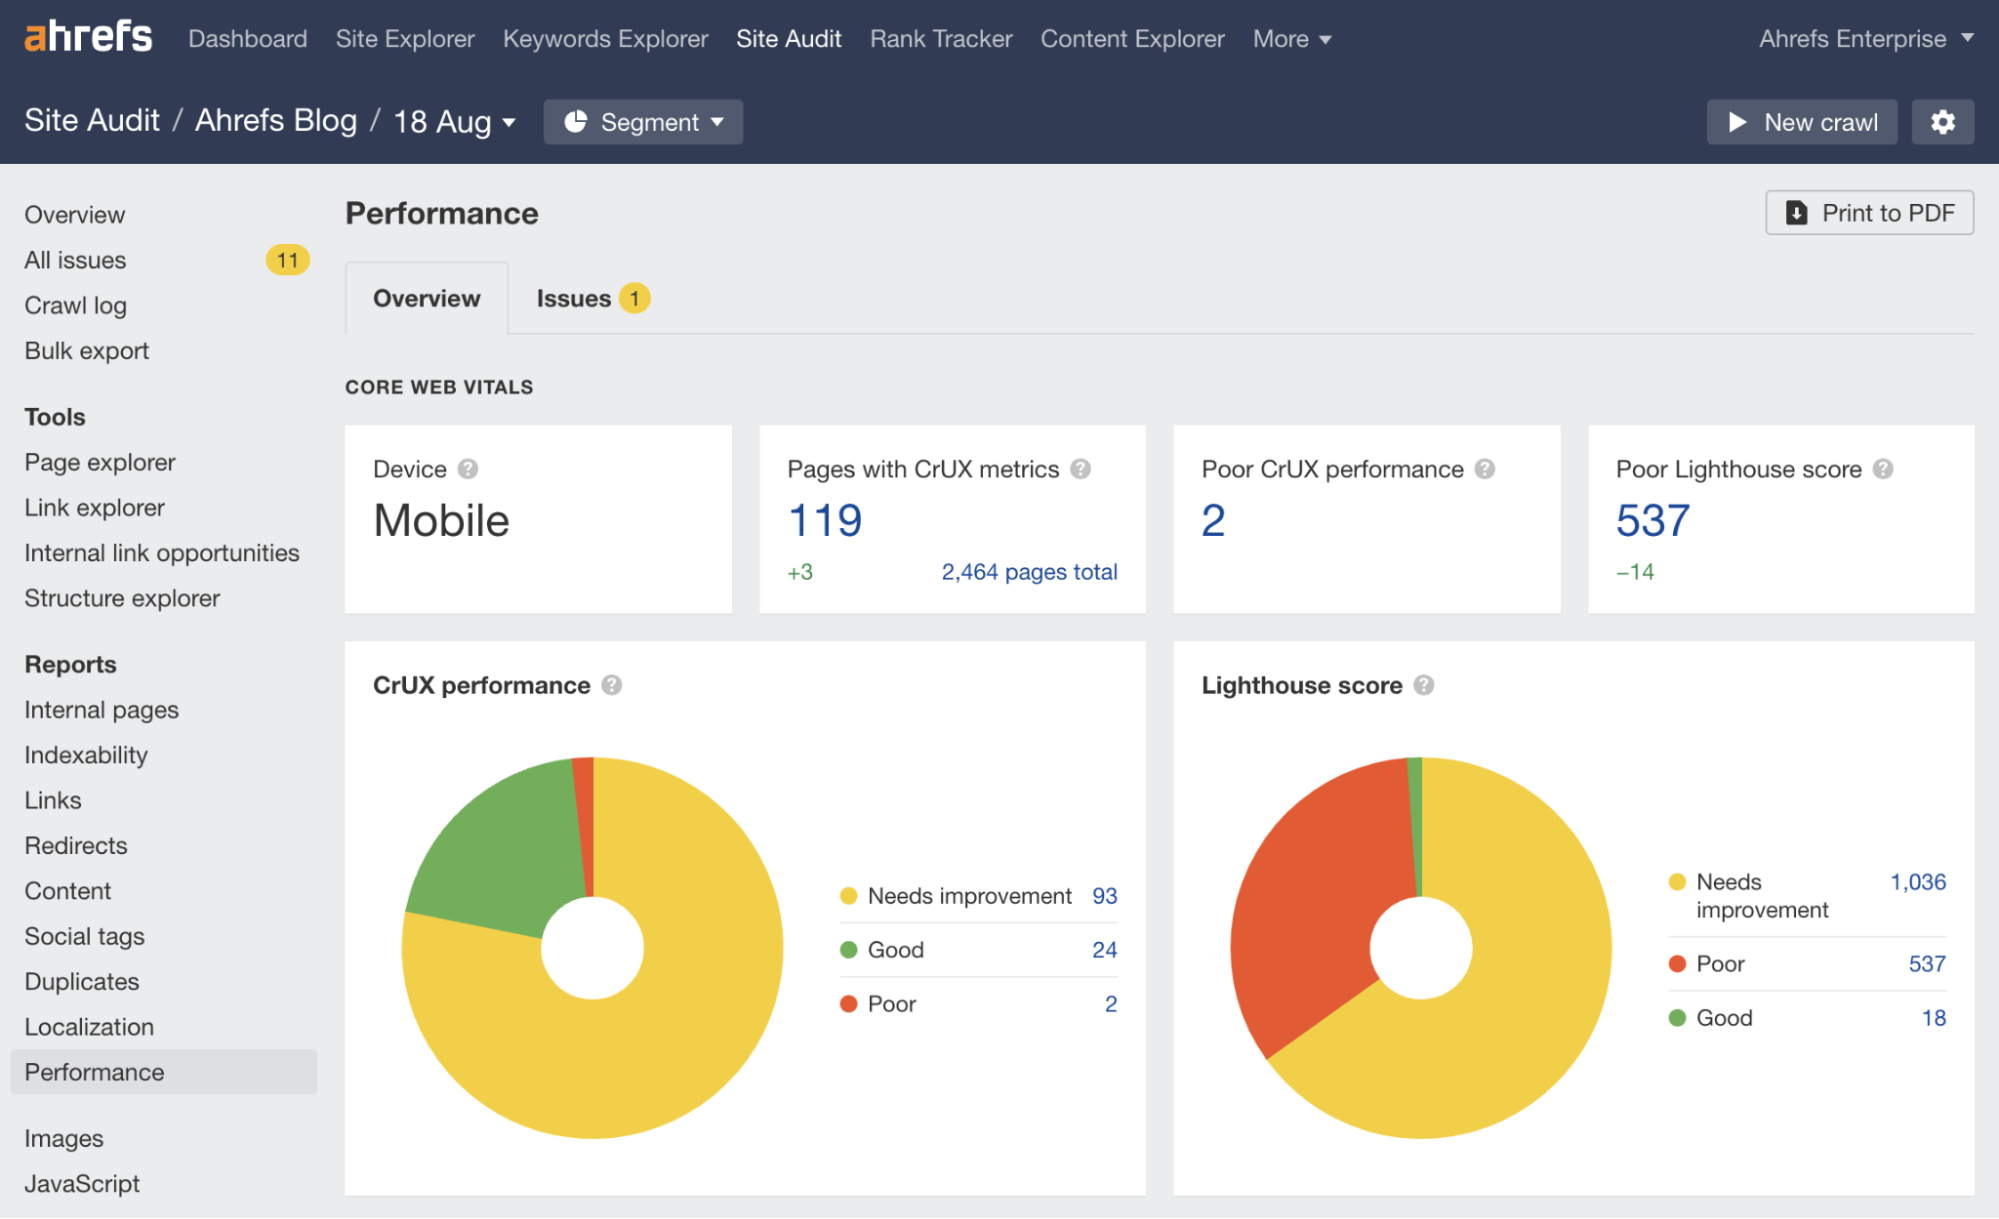 Performance report in Ahrefs' Site Audit